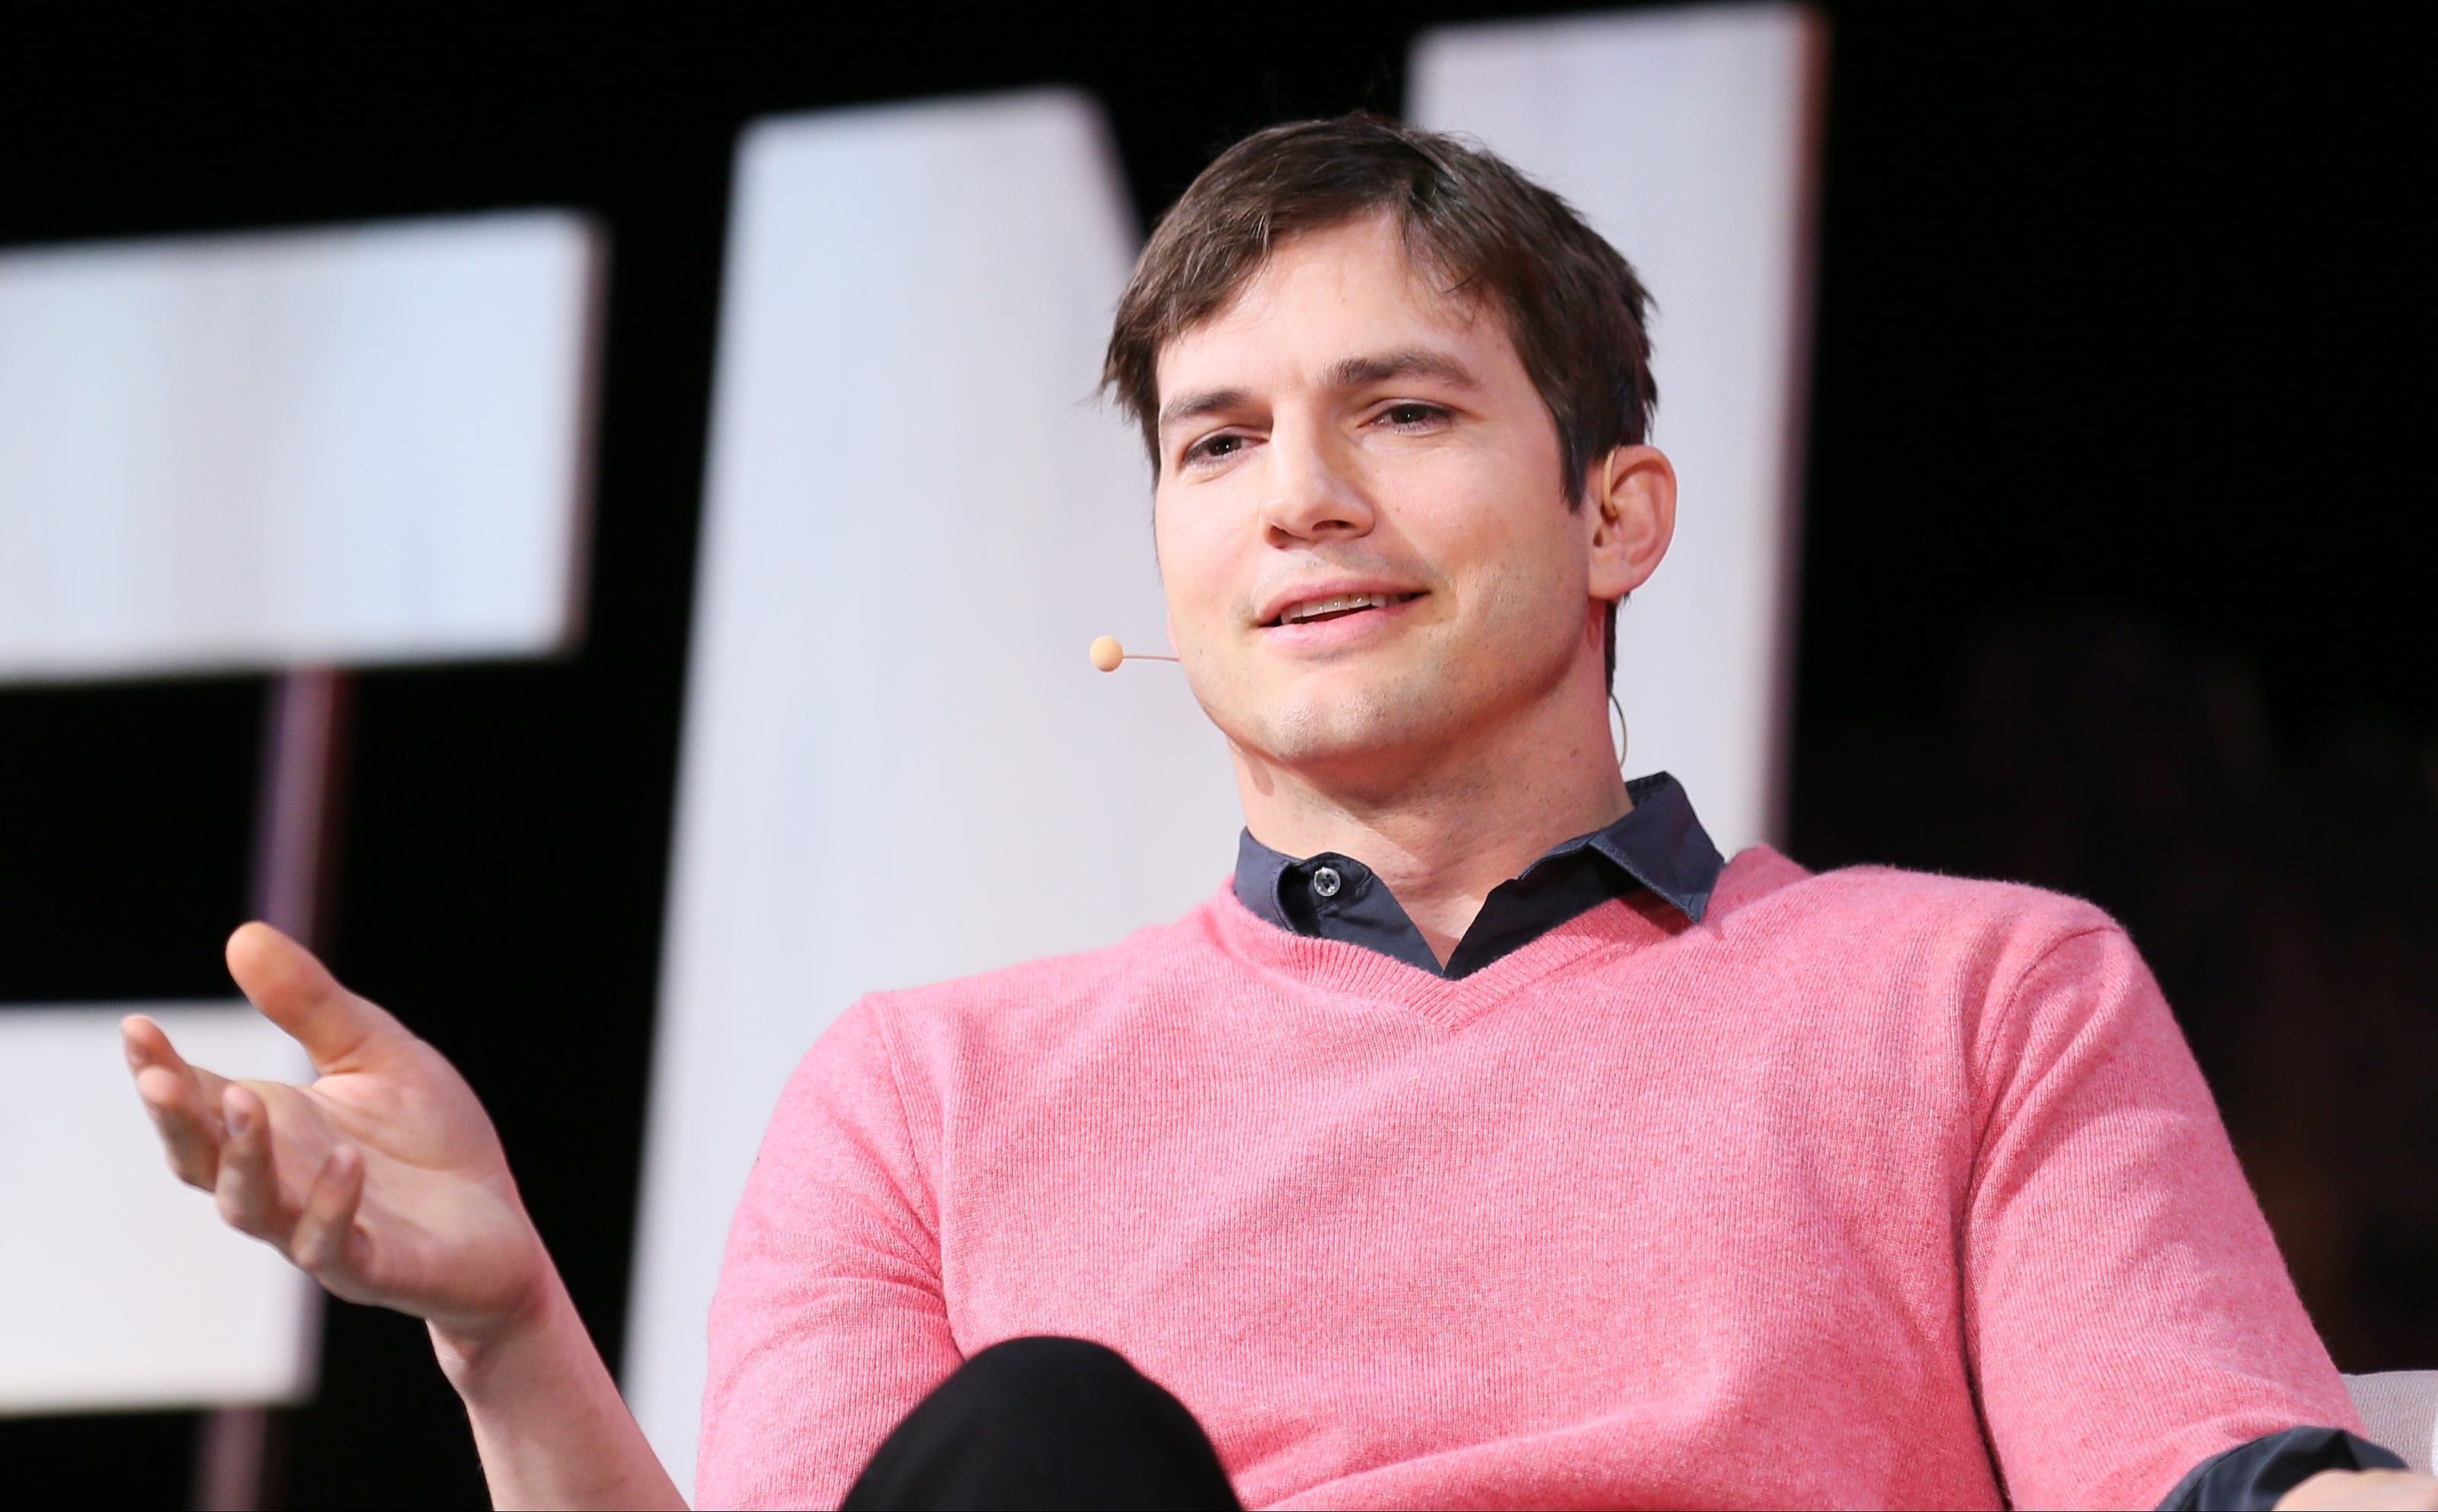 LOS ANGELES, CA - NOVEMBER 19: Ashton Kutcher speaks onstage at the 3rd Annual Airbnb Open Spotlight at The Orpheum on November 19, 2016 in Los Angeles, California.  (Photo by JB Lacroix/WireImage) (JB Lacroix&mdash;WireImage)